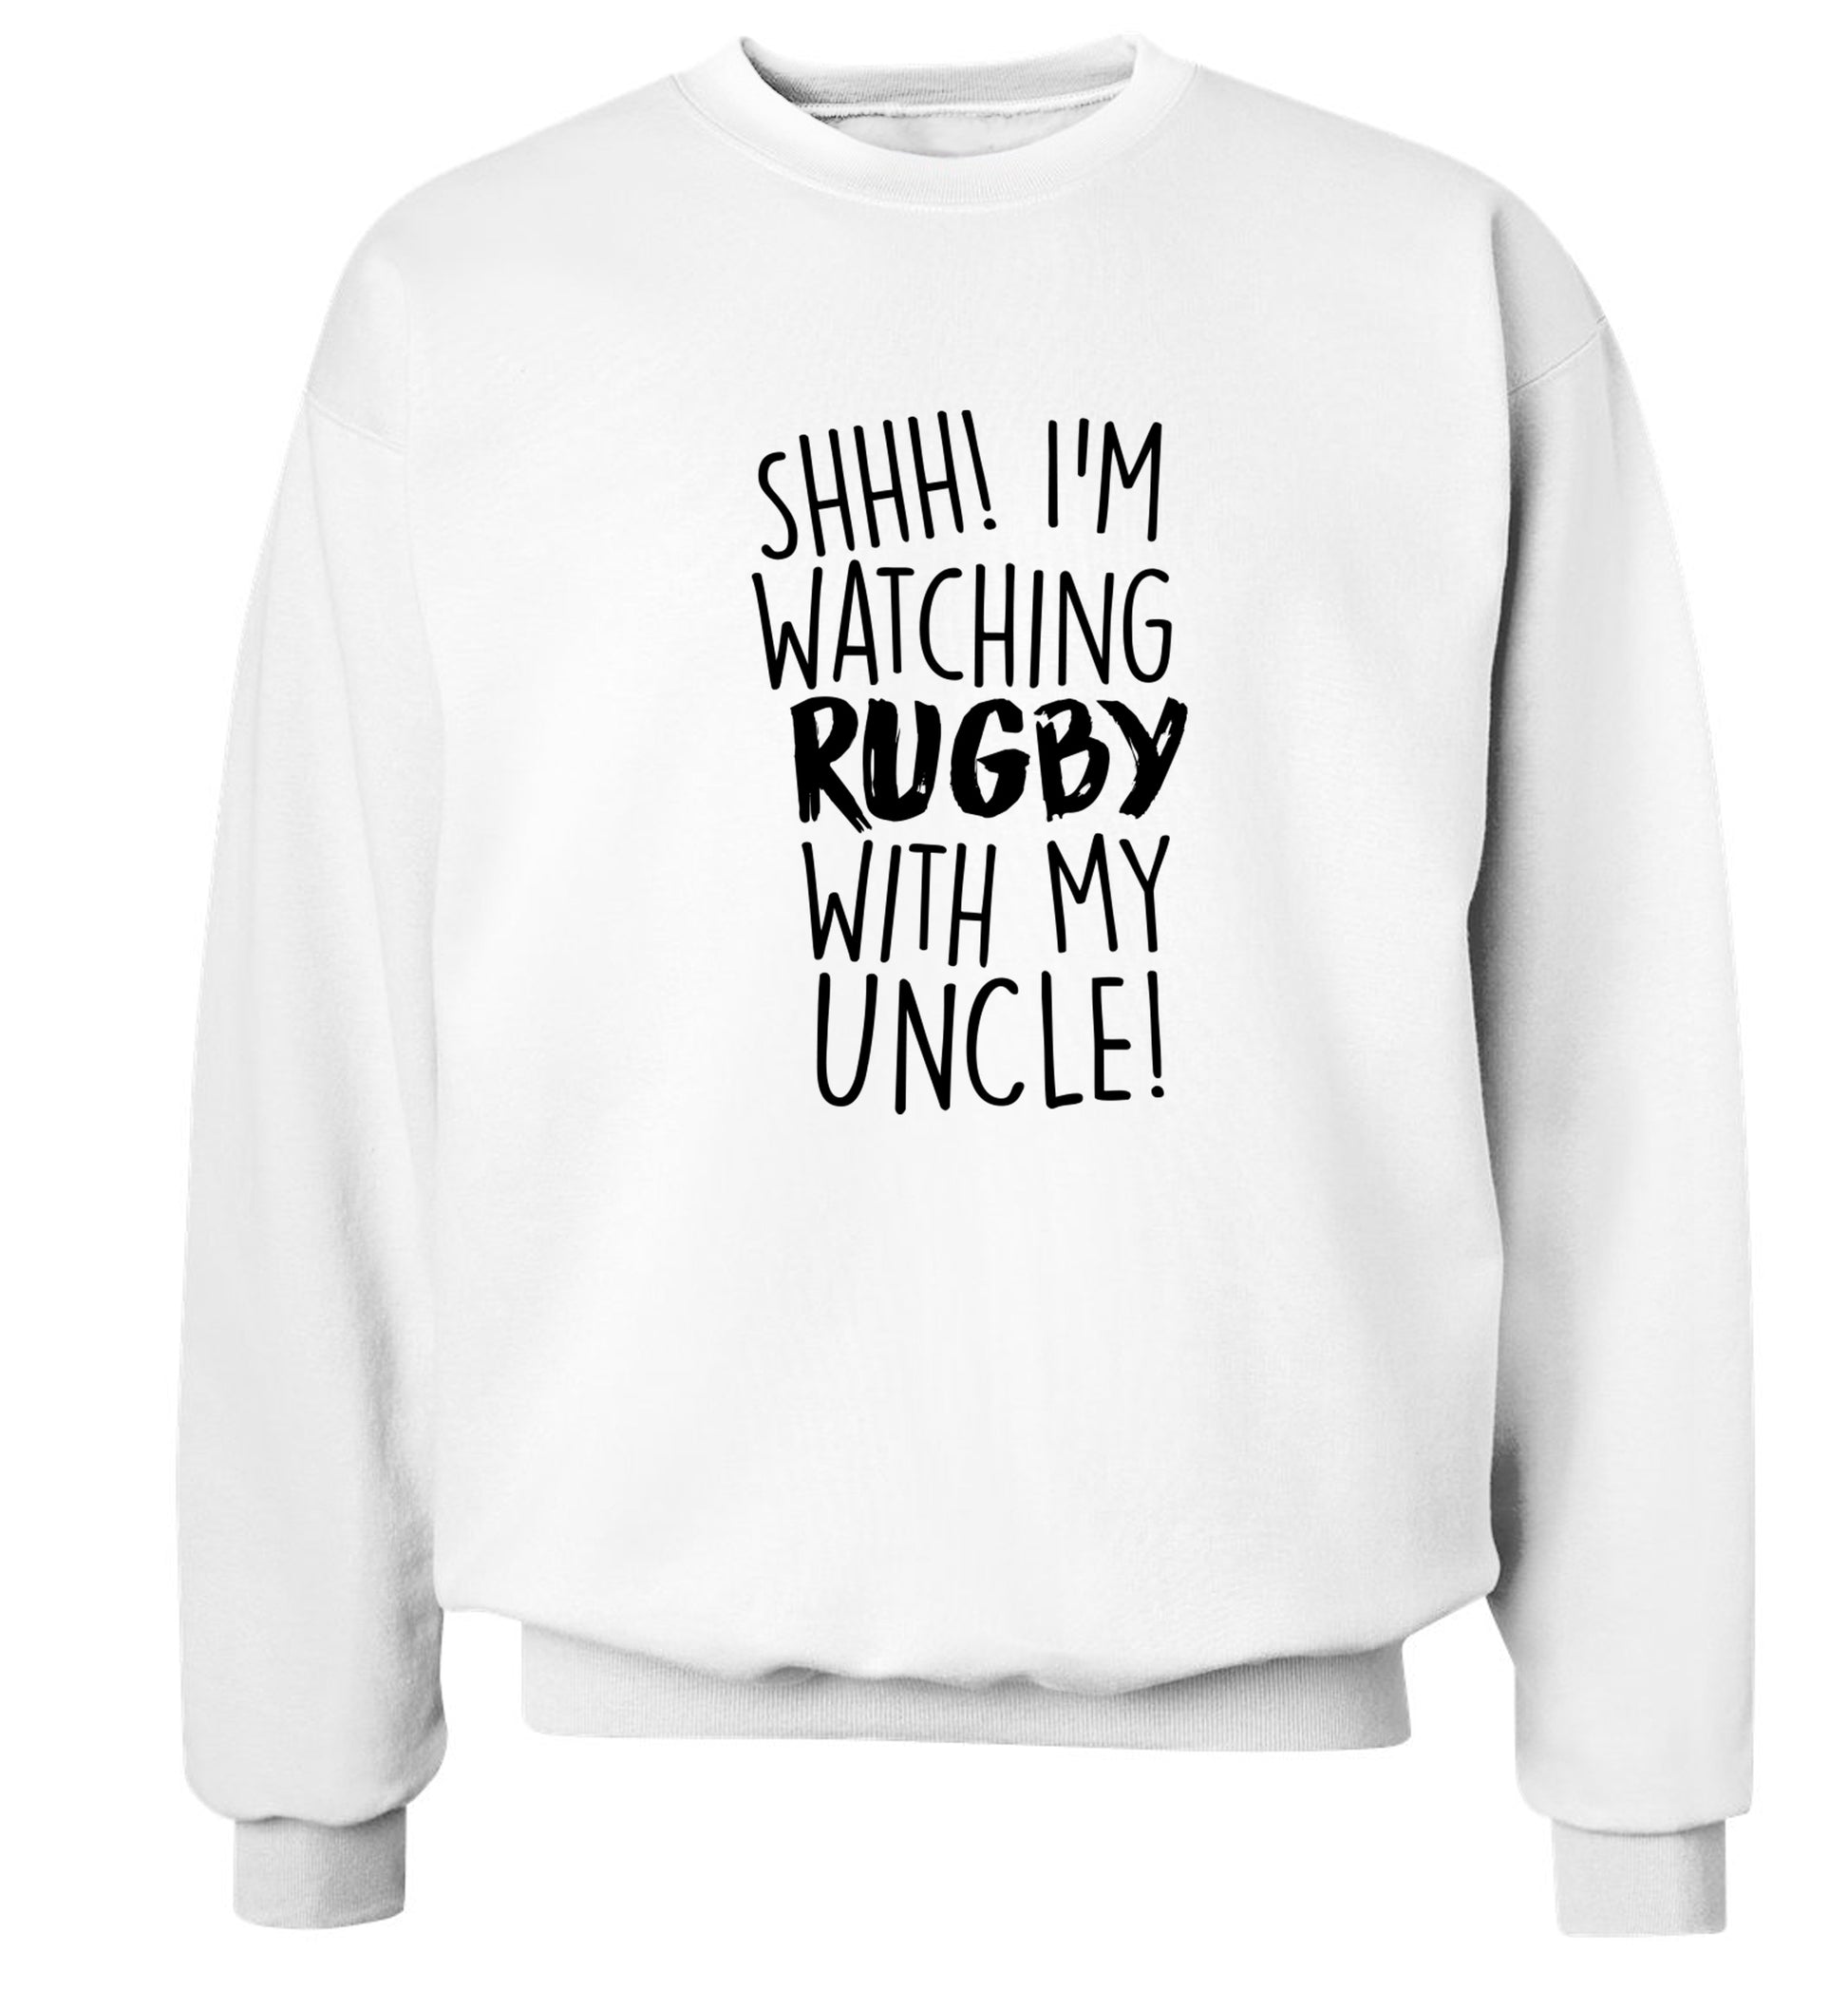 Shh.. I'm watching rugby with my uncle Adult's unisex white Sweater 2XL